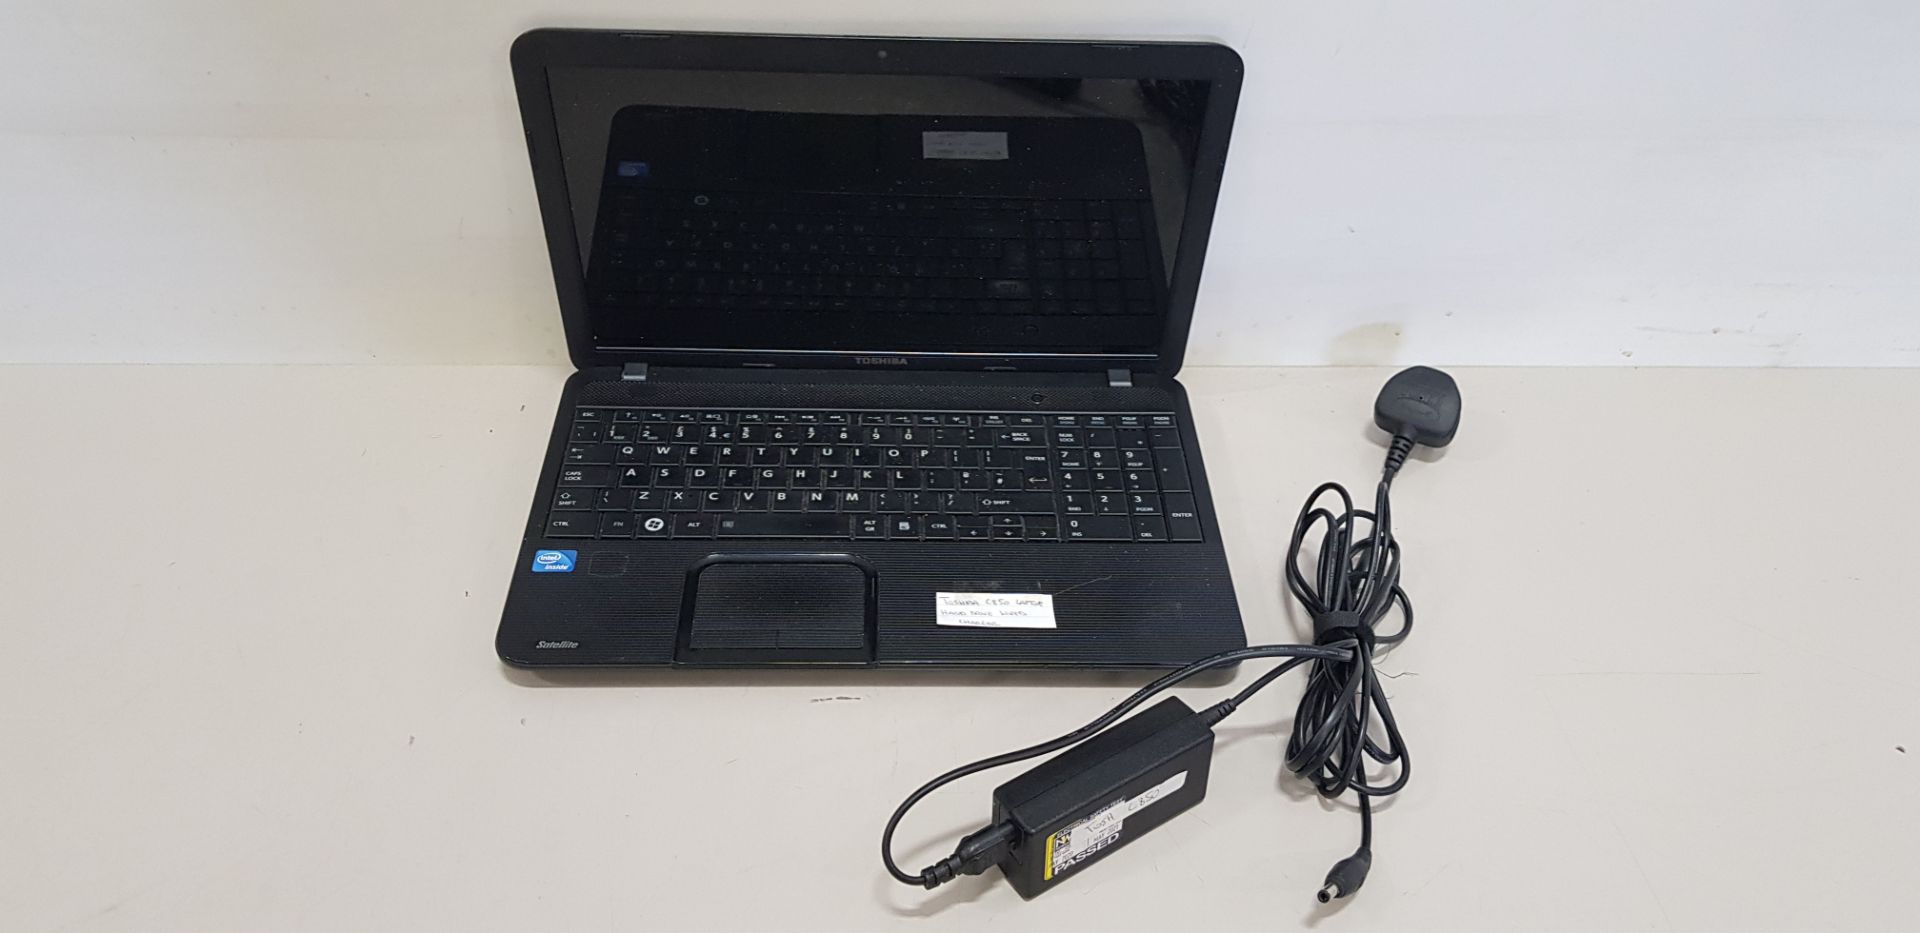 TOSHIBA C850 LAPTOP WITH INTEL - HARD DRIVE WIPED - COMES WITH CHARGER